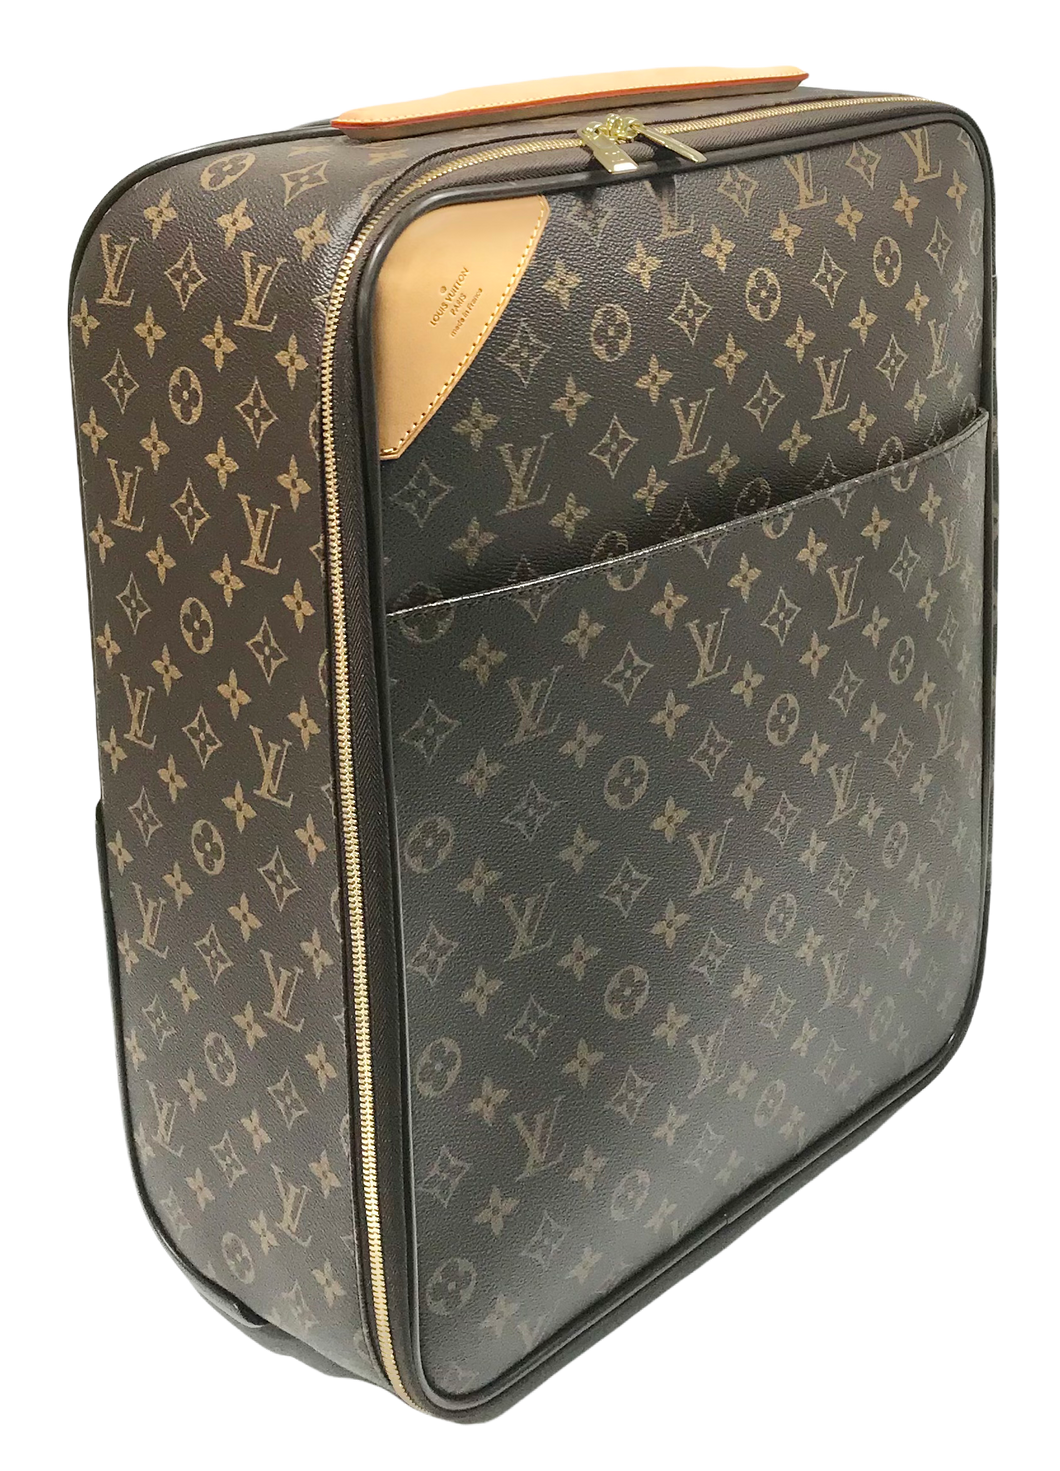 Up for your consideration: LOUIS VUITTON Monogram Pegase 45